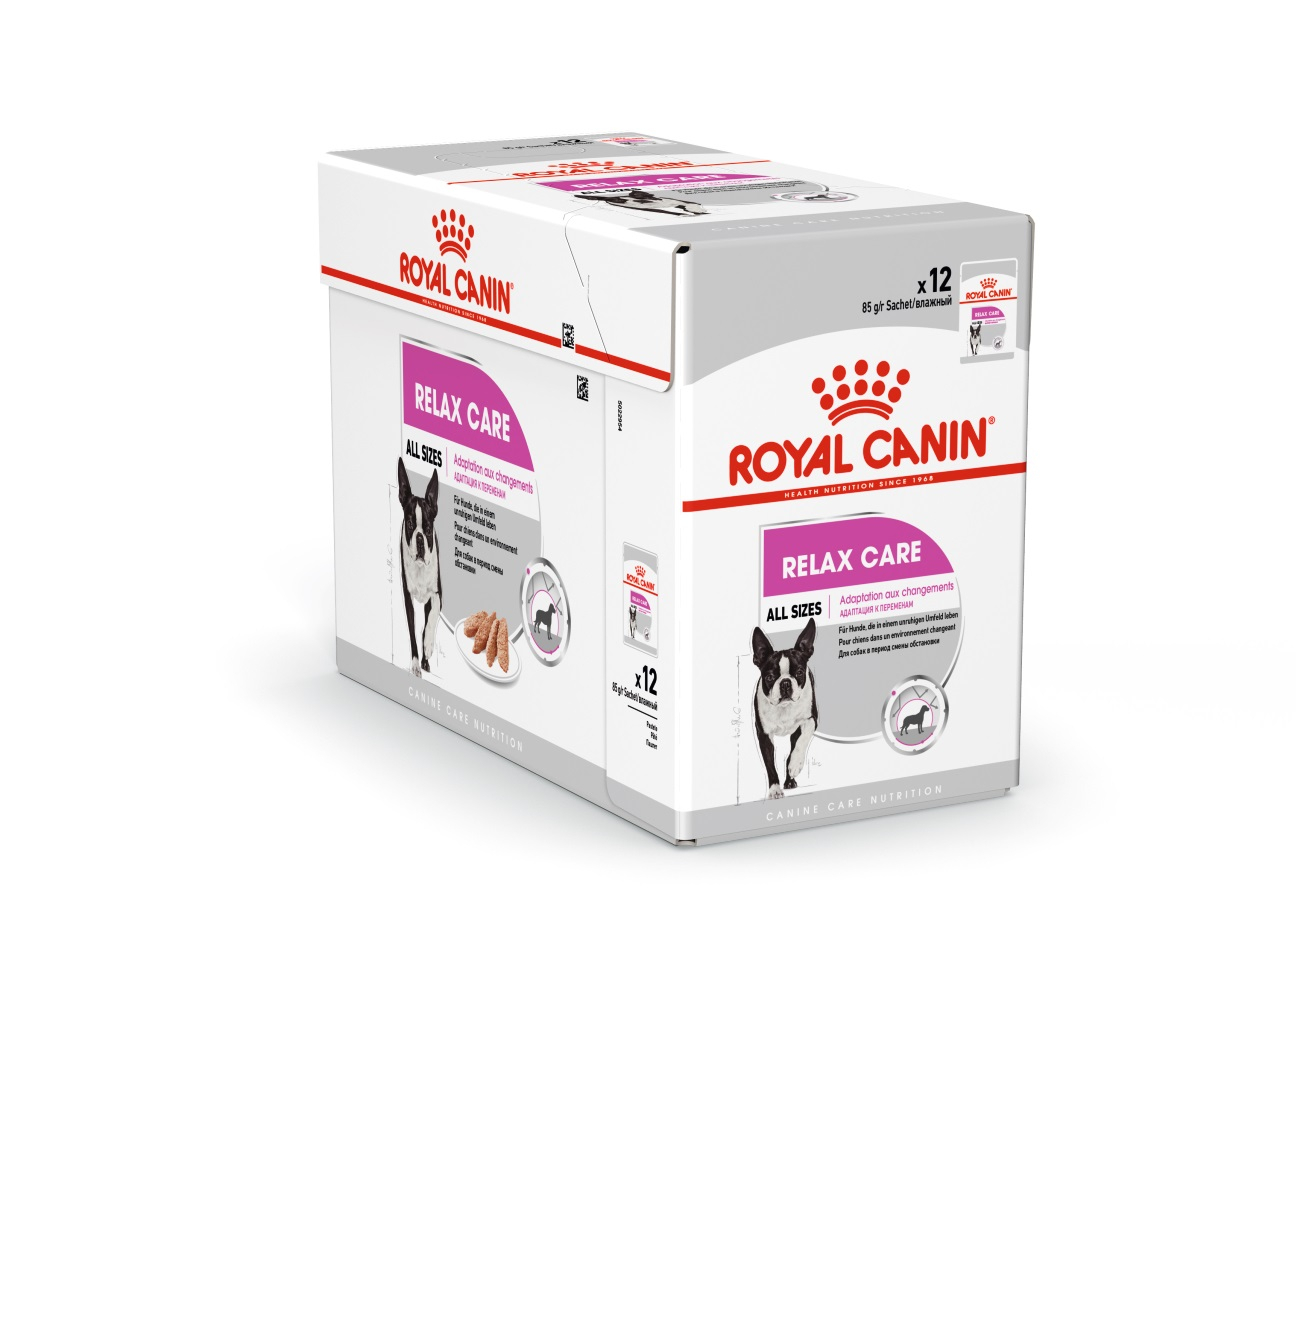 Royal Canin Relax Care patè in mousse per cani nervosi